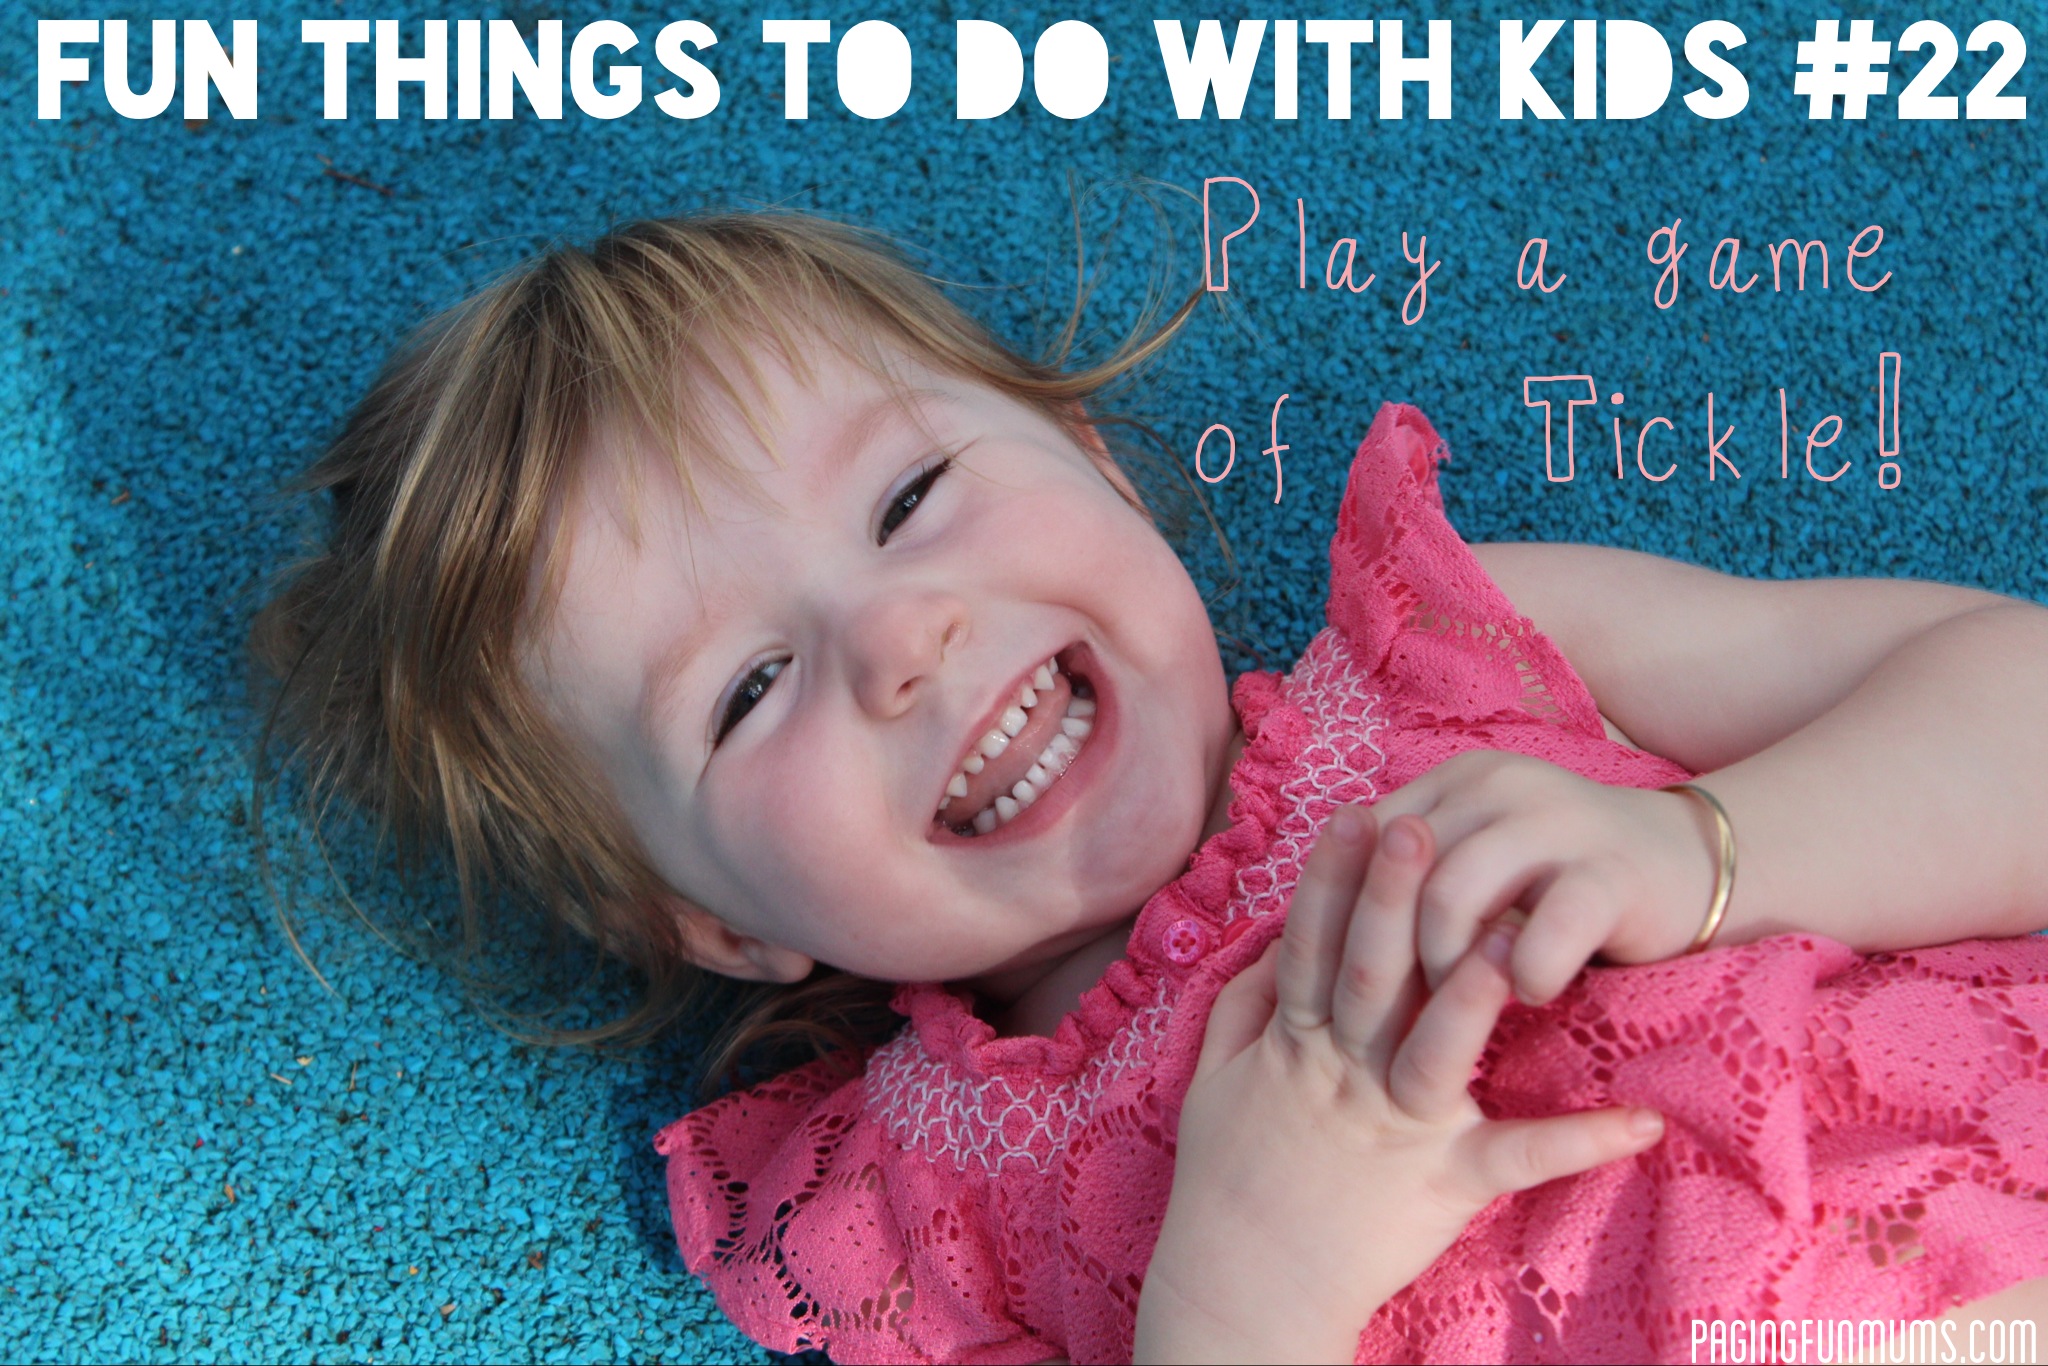 Fun things to do with kids!